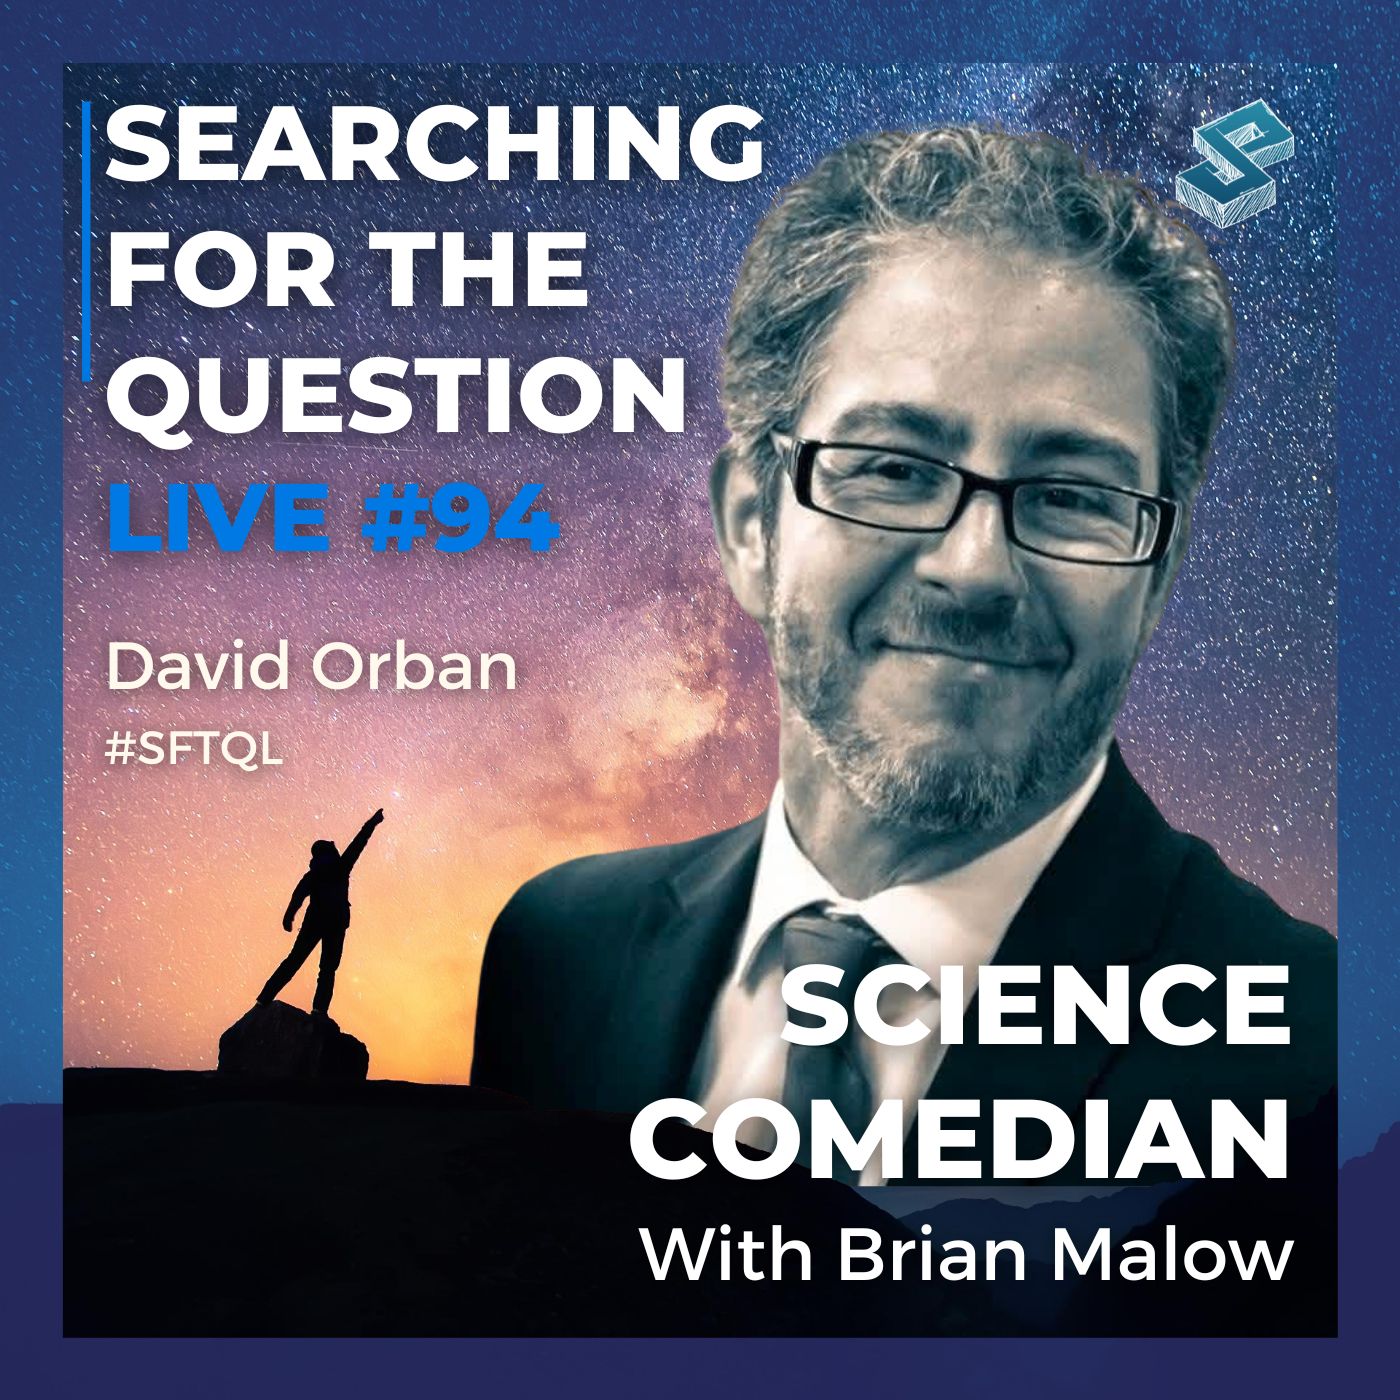 Brian Malow, Science Comedian - Searching For The Question Live #94